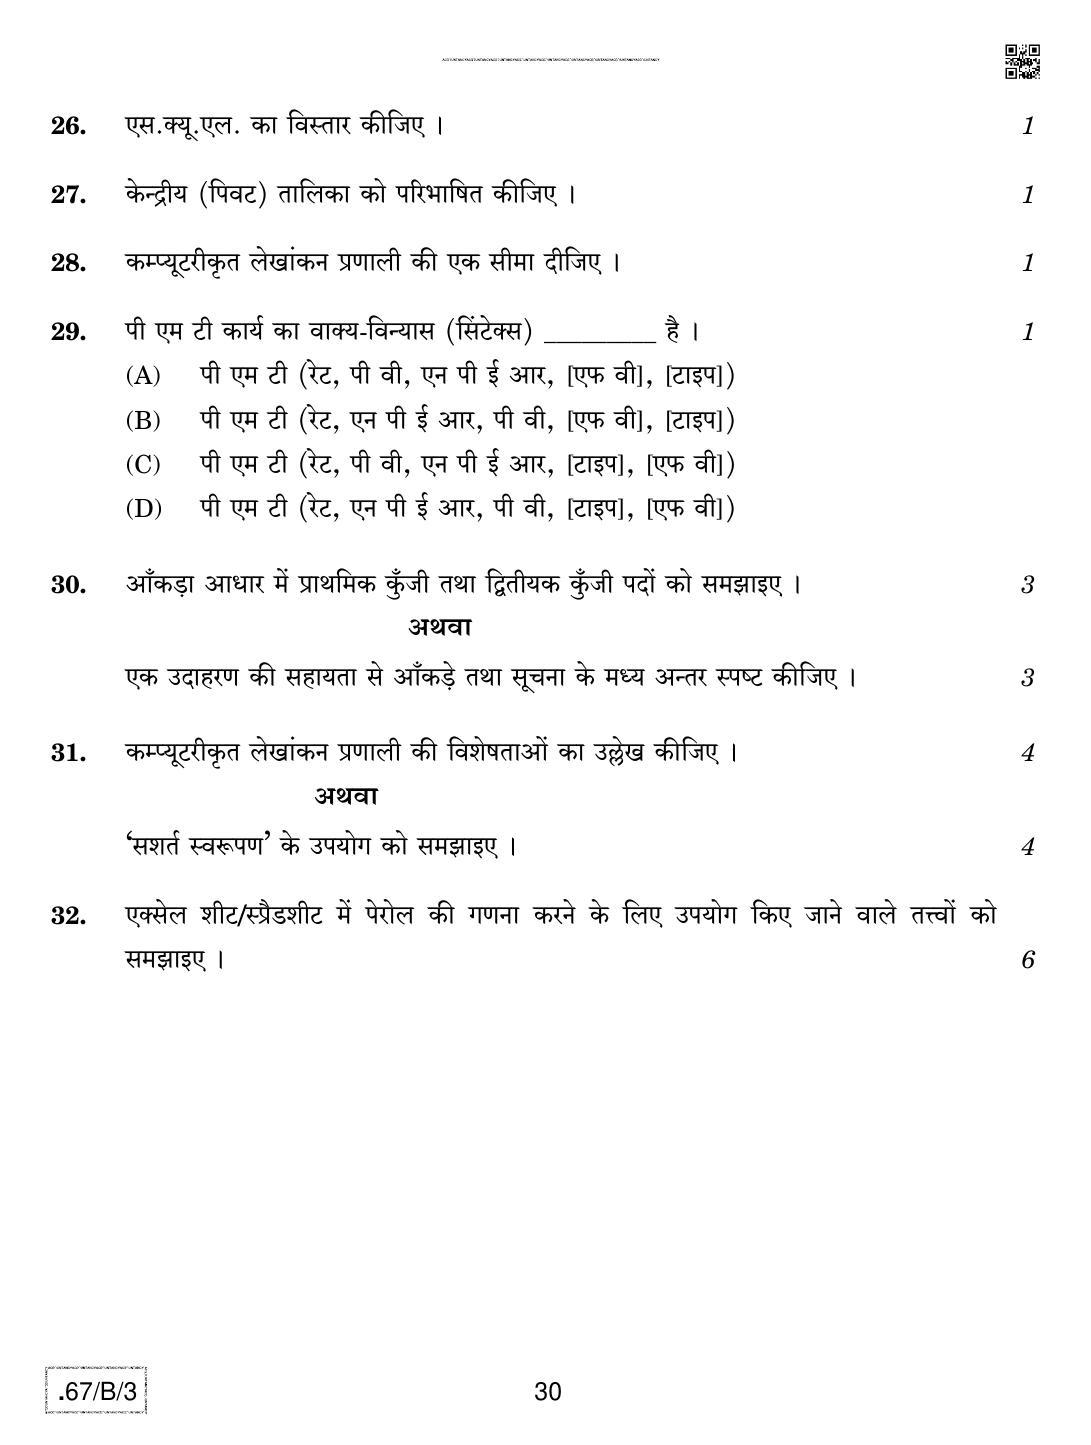 CBSE Class 12 67-C-3 - Accountancy 2020 Compartment Question Paper - Page 30